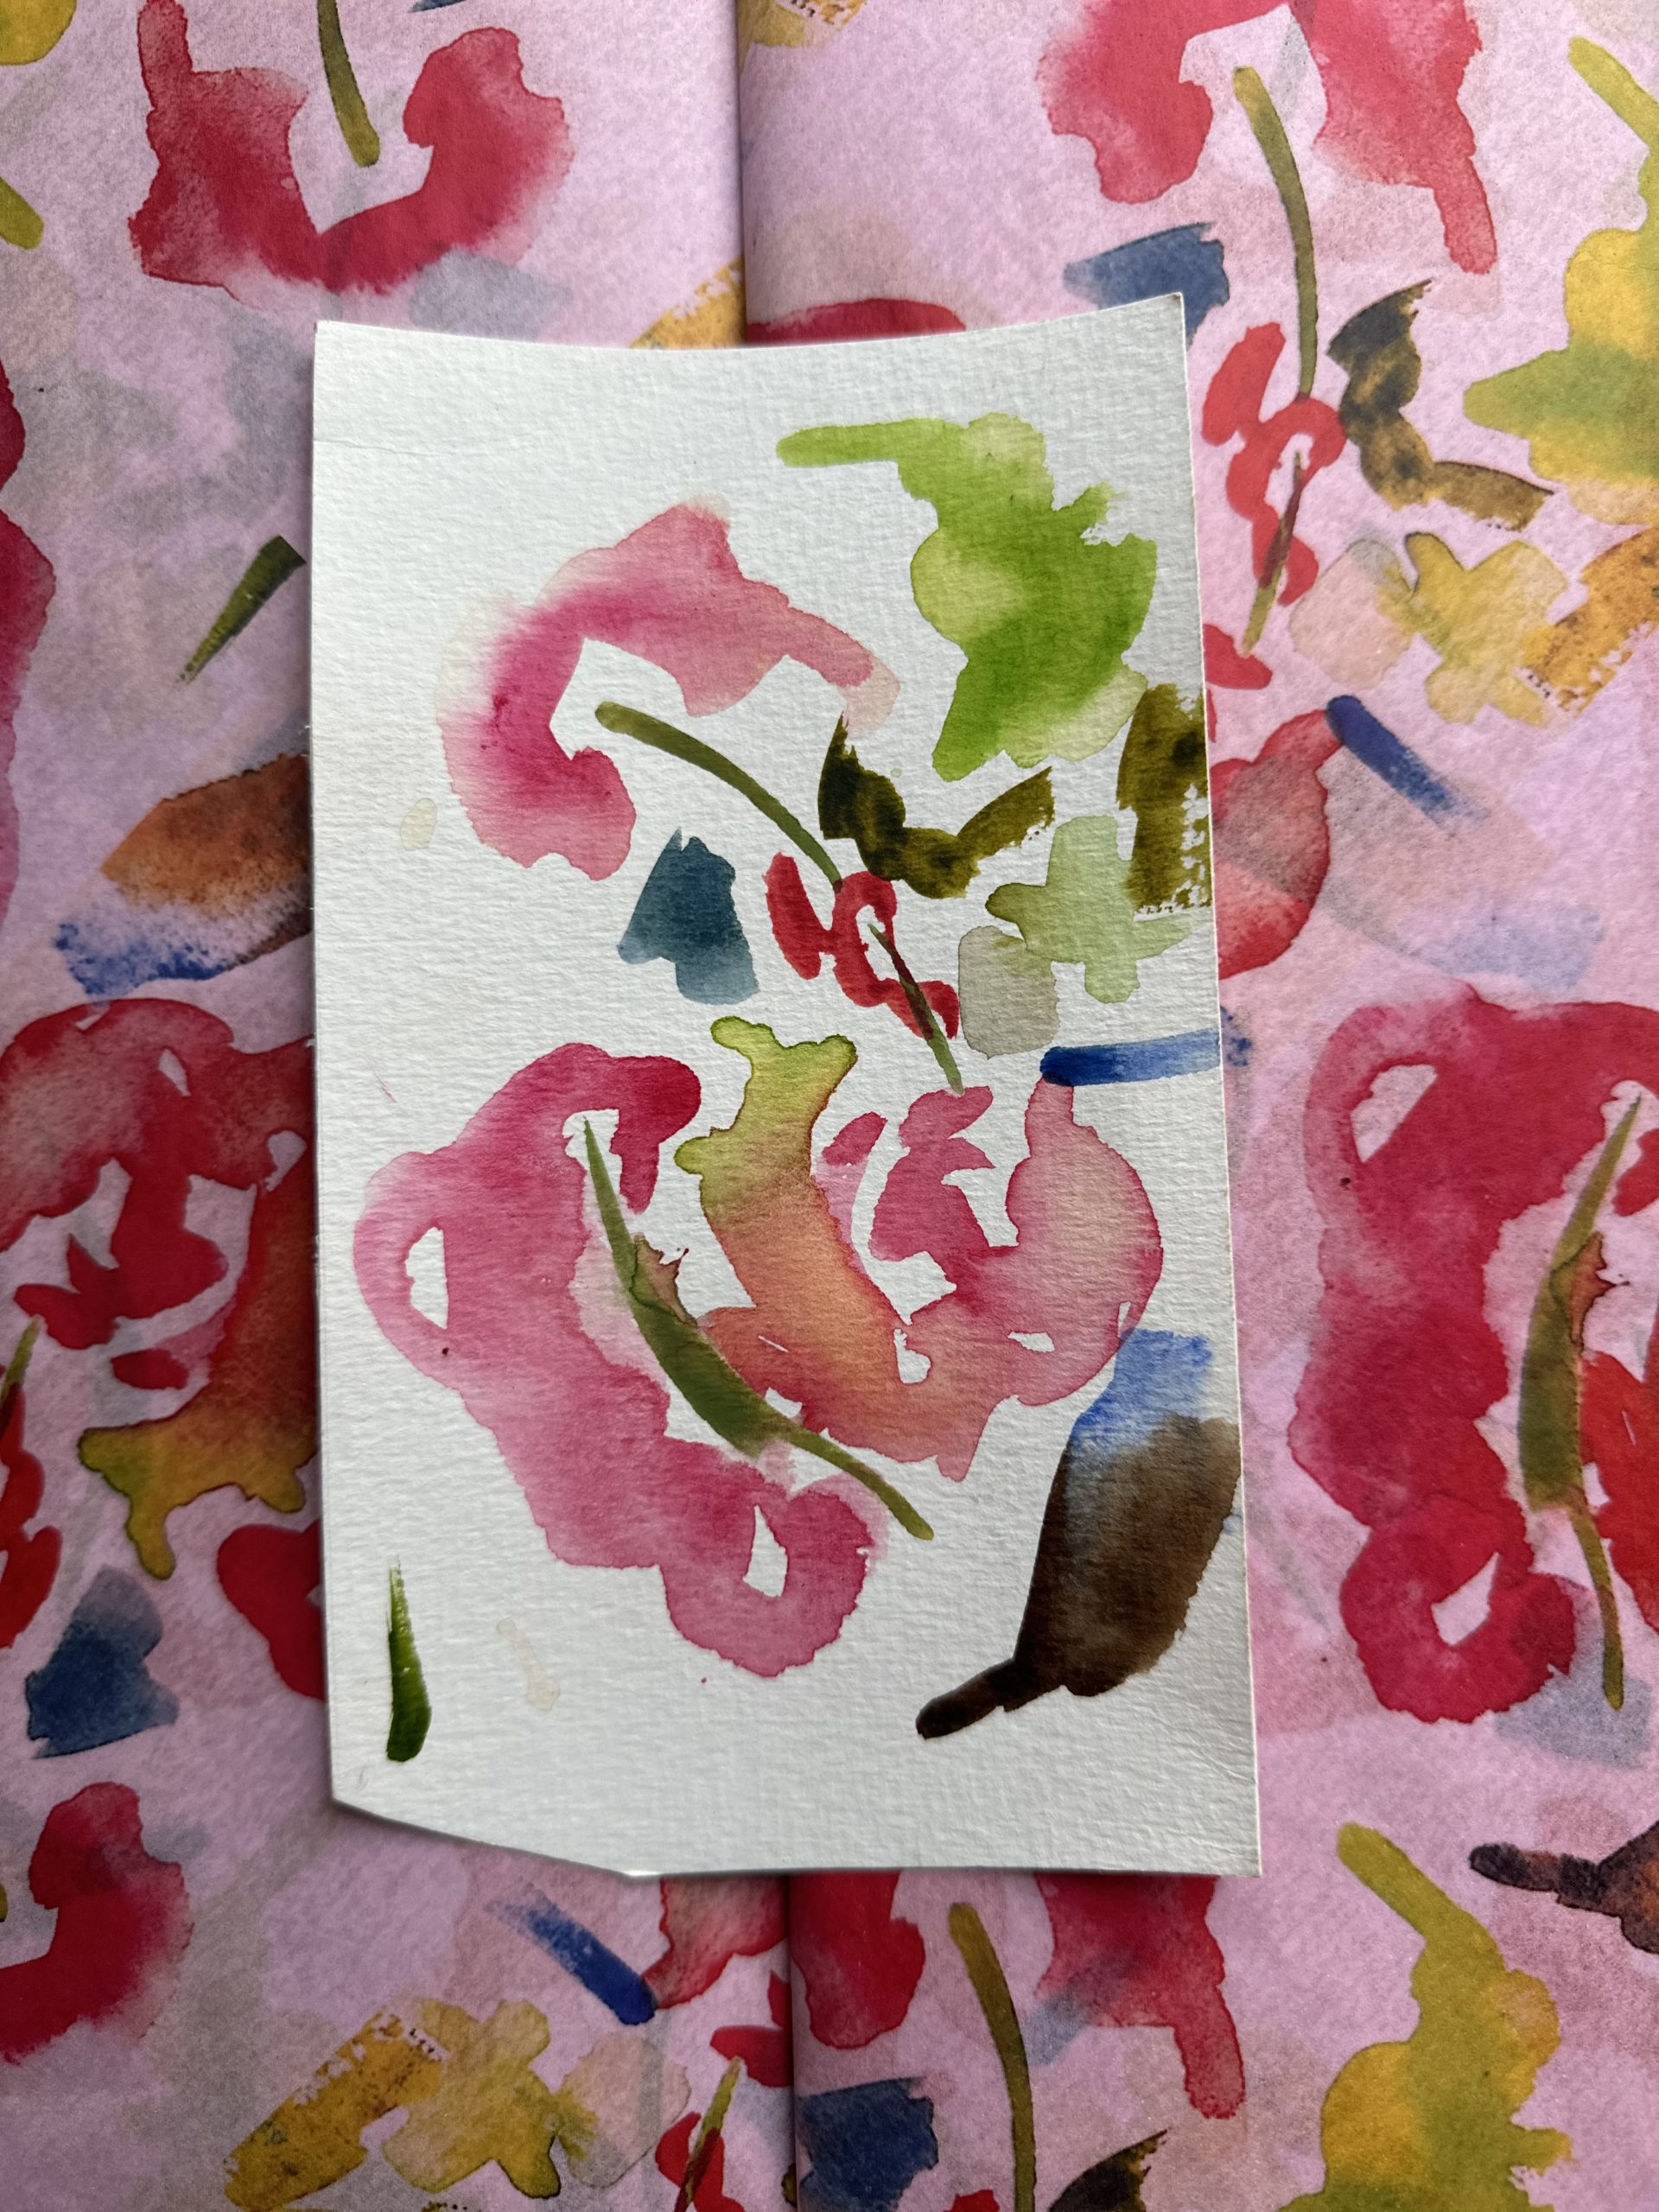 How To Print Your Art On Tissue Paper